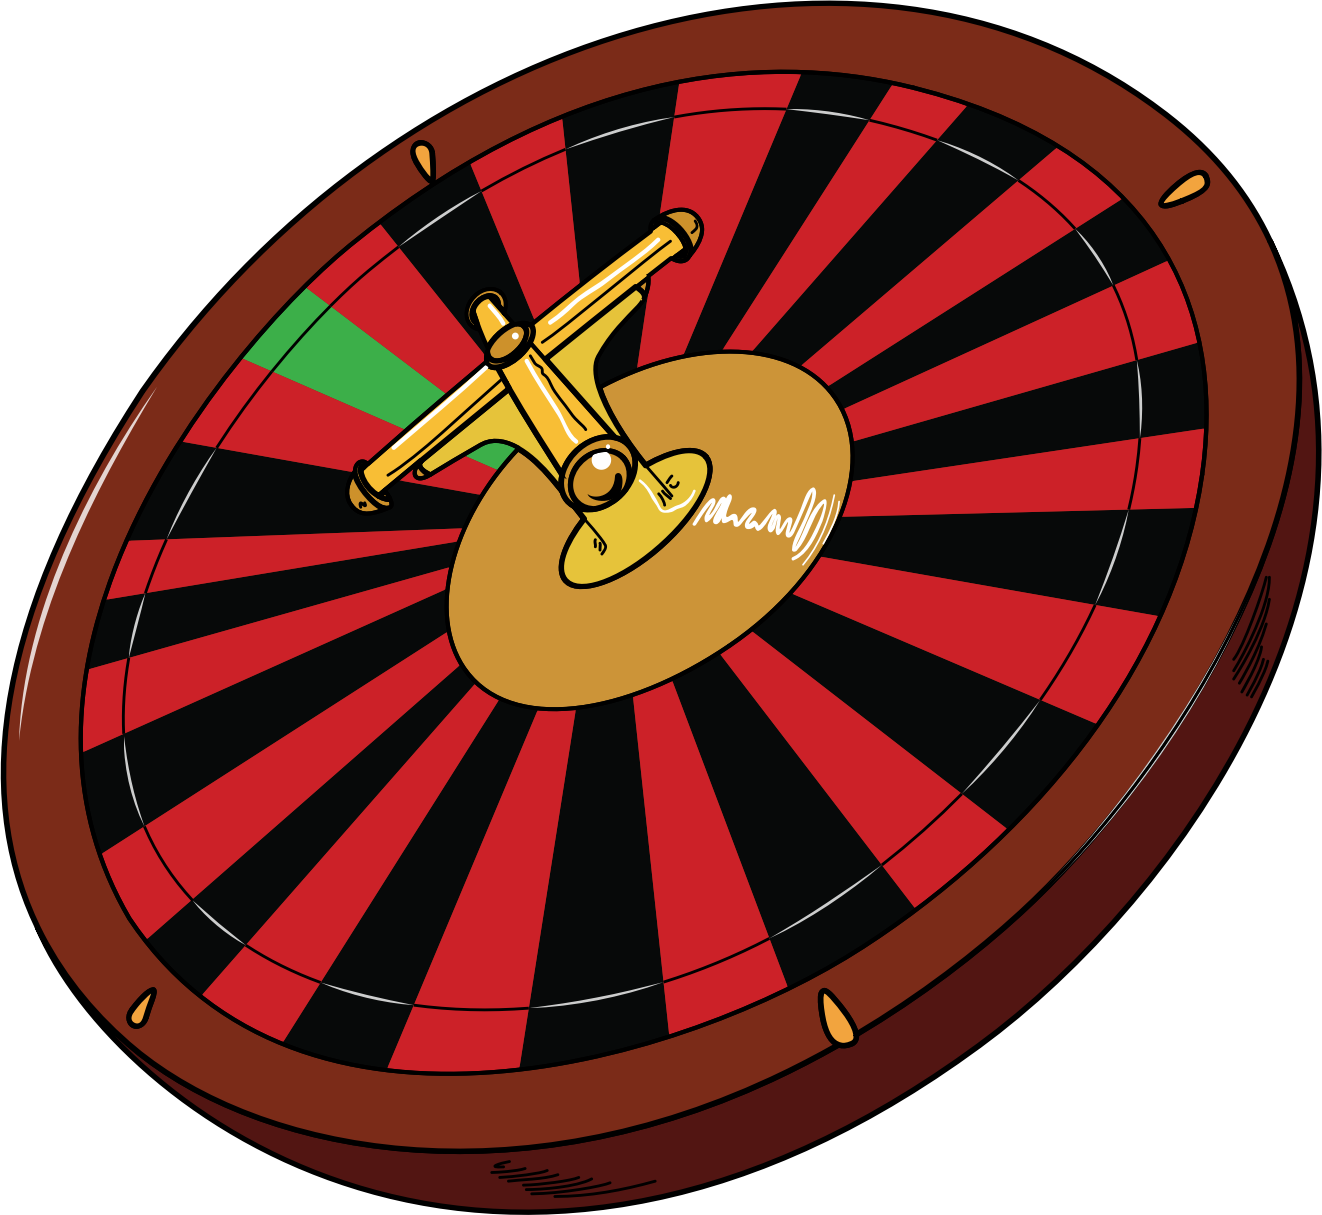 The Office No Gif Download - Roulette Wheel Tshirt Casino Gamble Red Black Number (2000x1413)